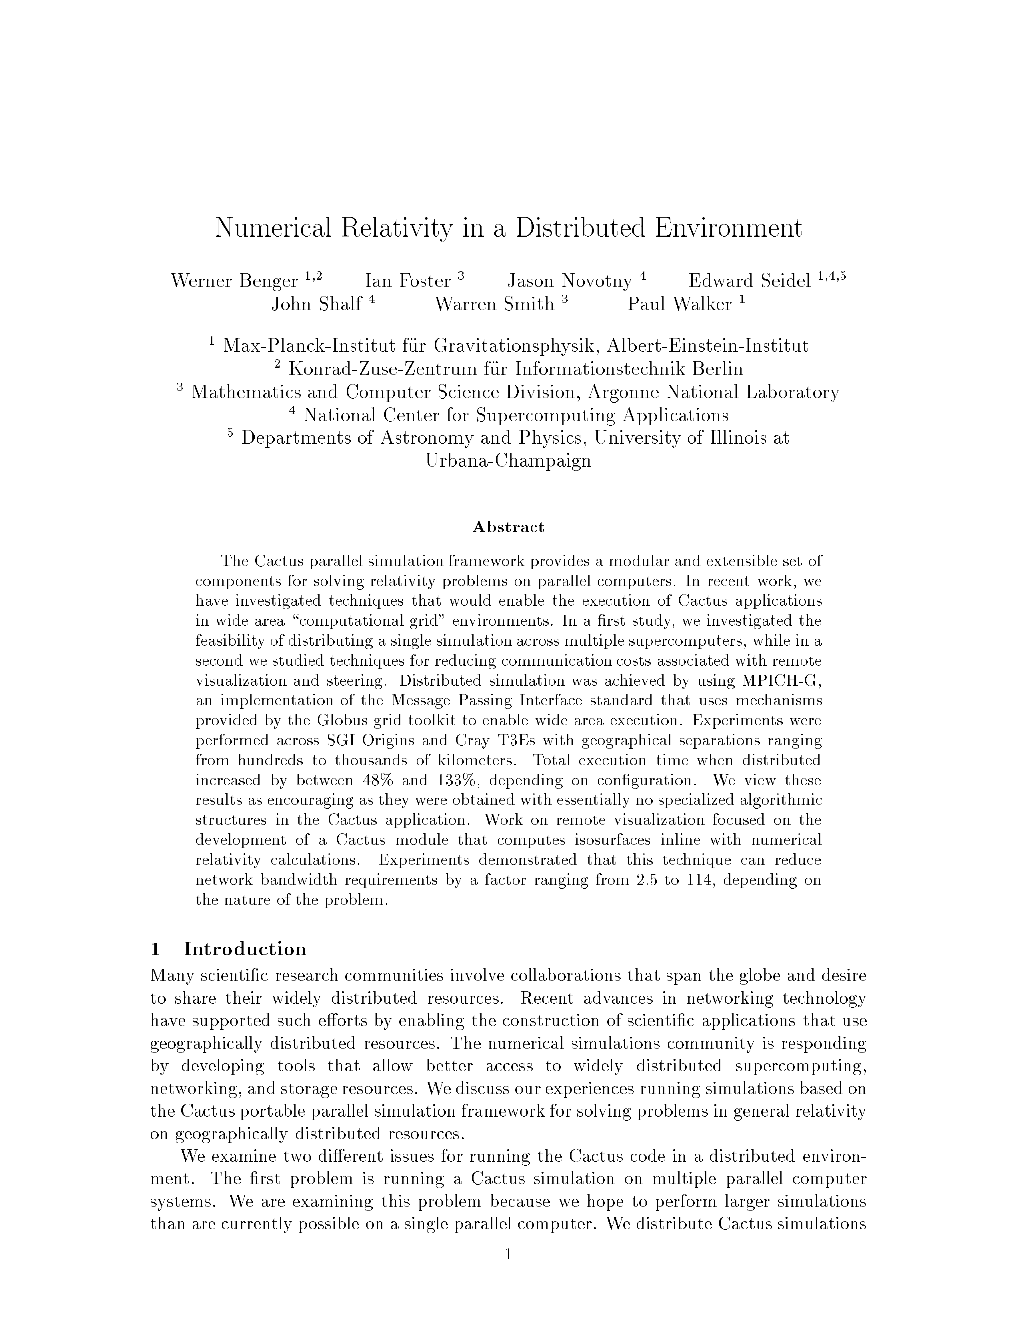 Numerical Relativity in a Distributed Environment